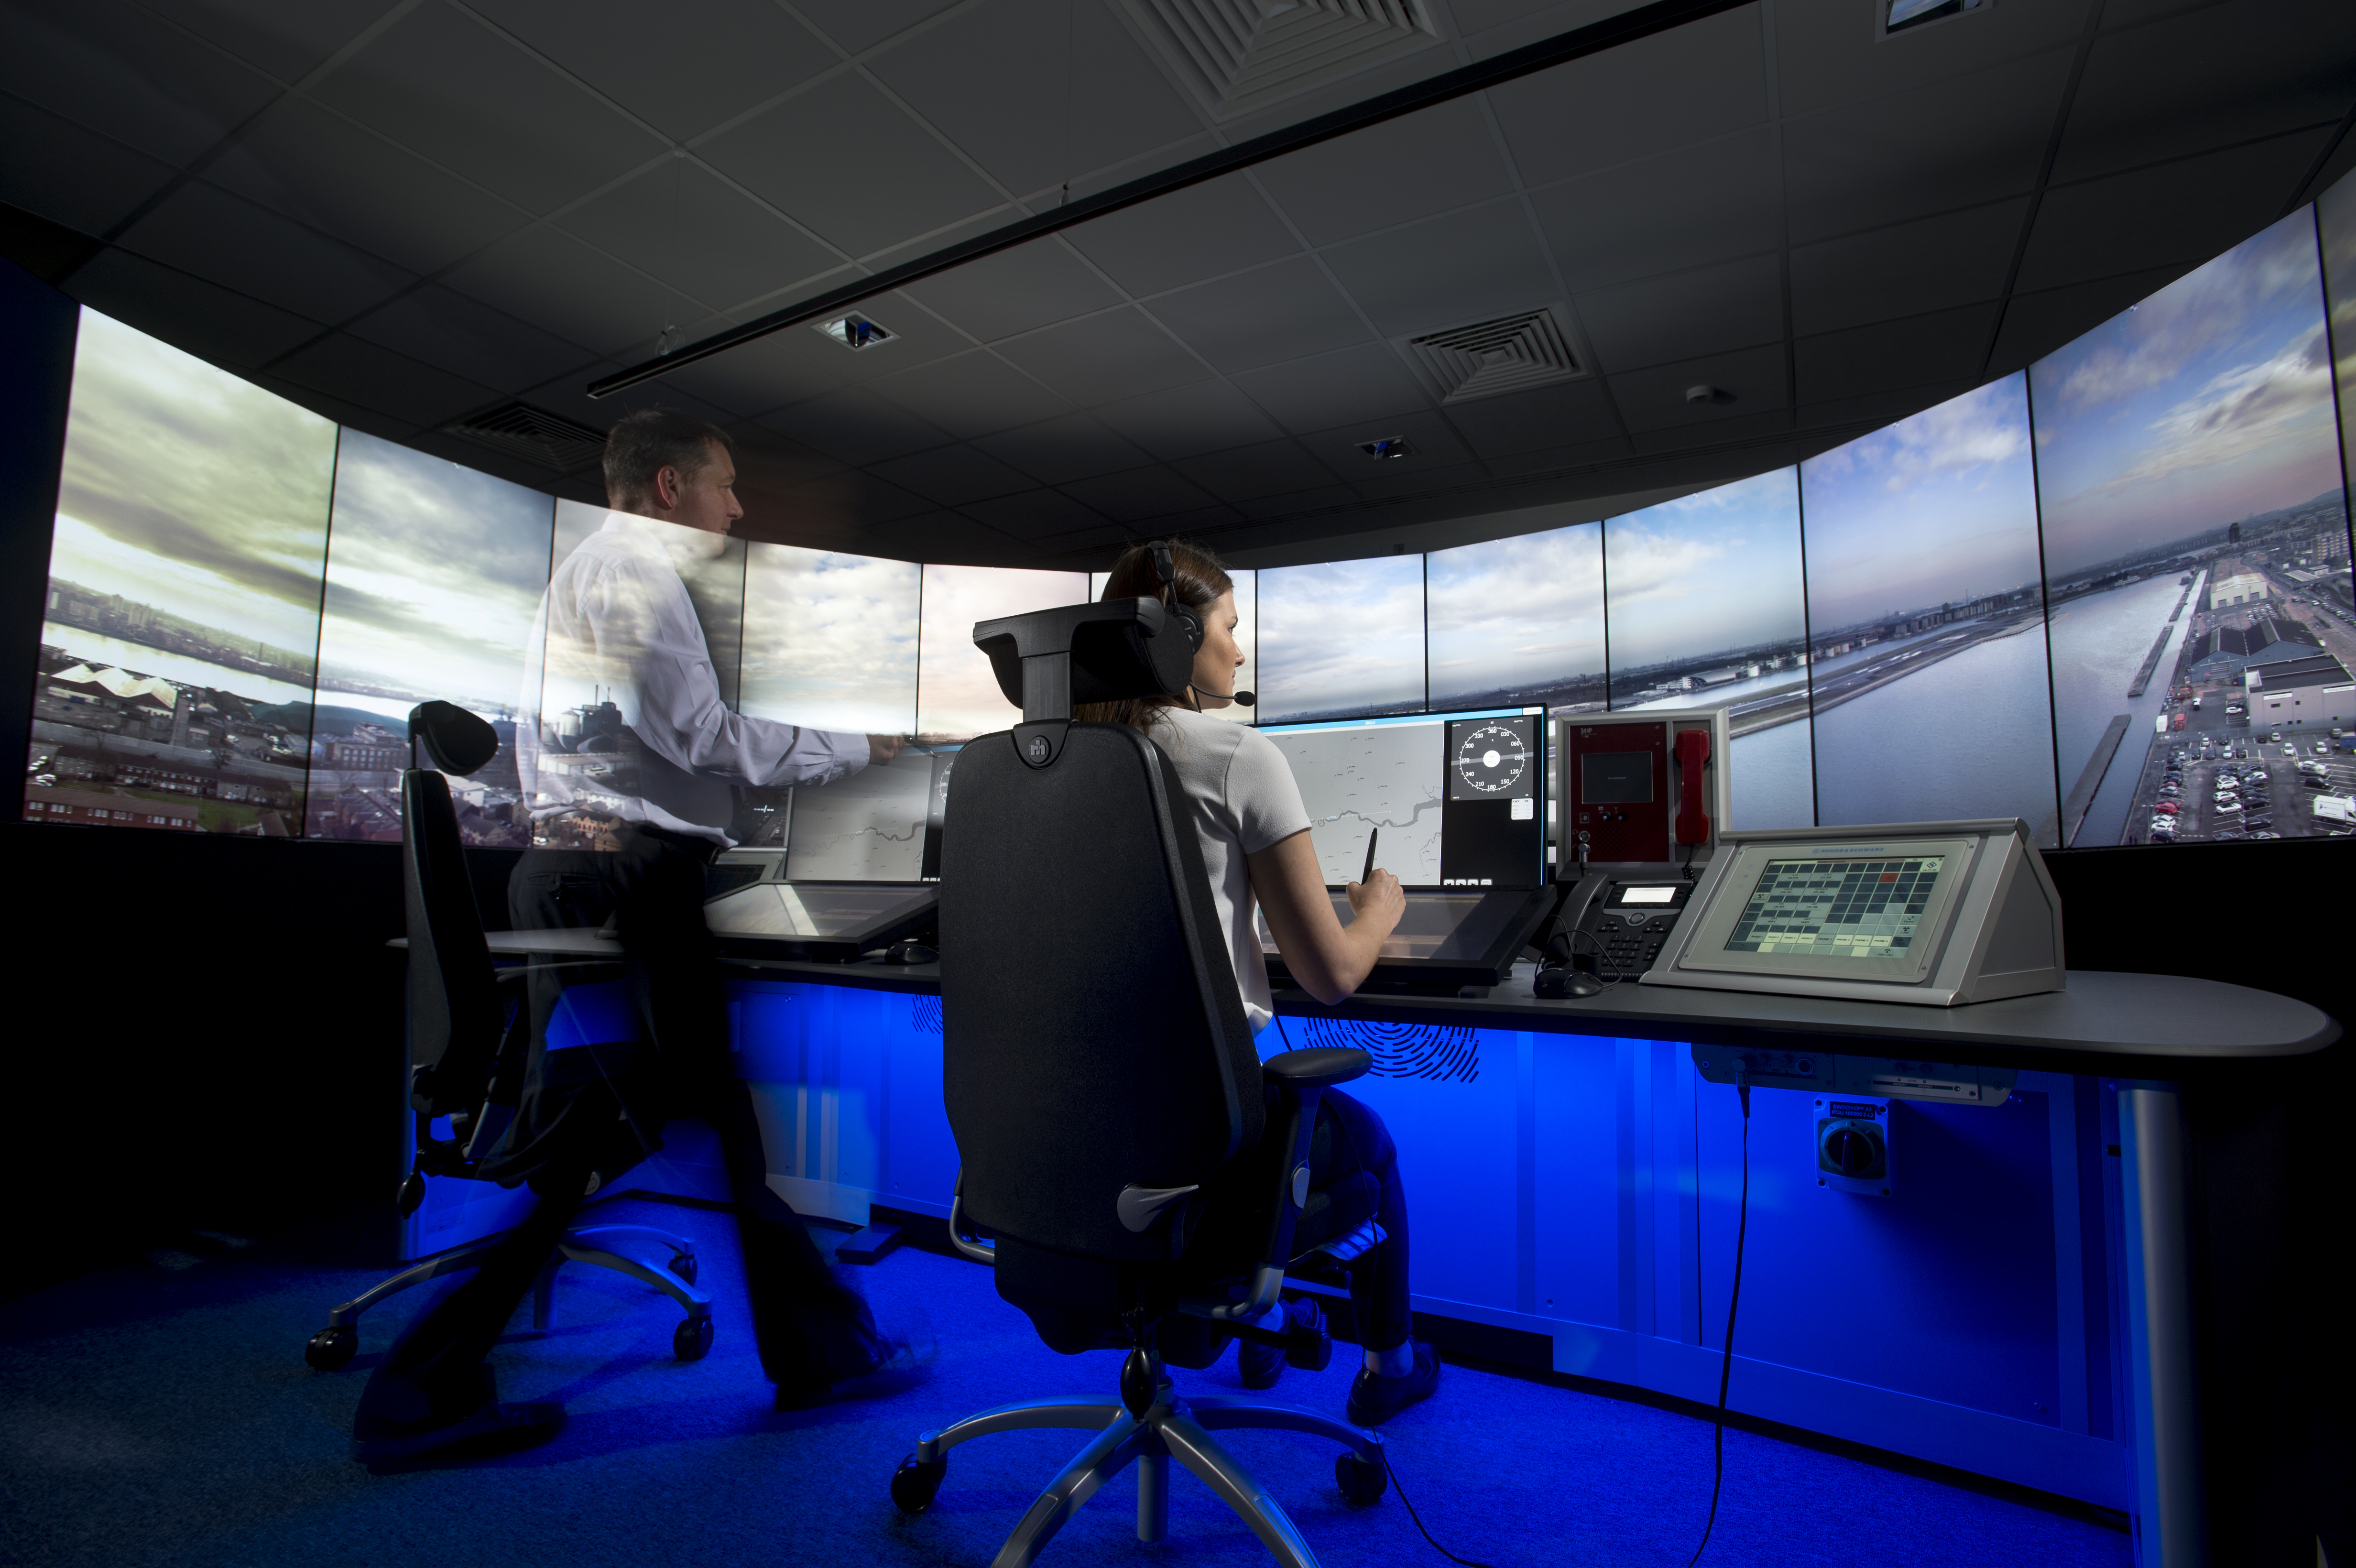 The 14 screen provide controllers with a full 360 degree view of the airfield.